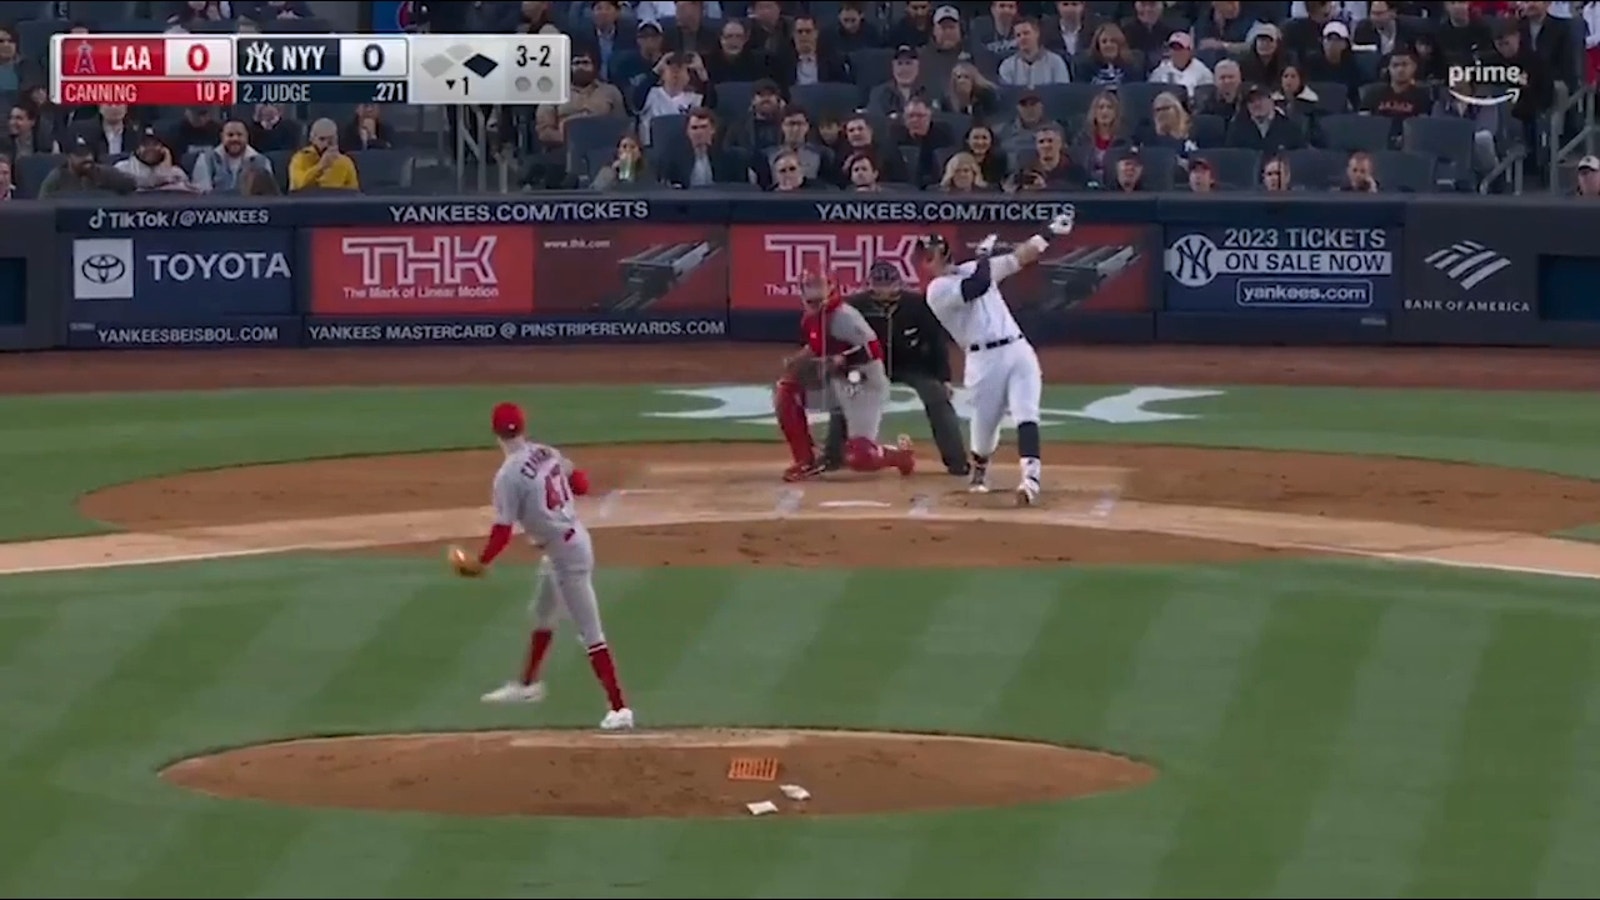 Aaron Judge smashes a two-run homer to help the Yankees take an early 2-0 lead over the Angels.